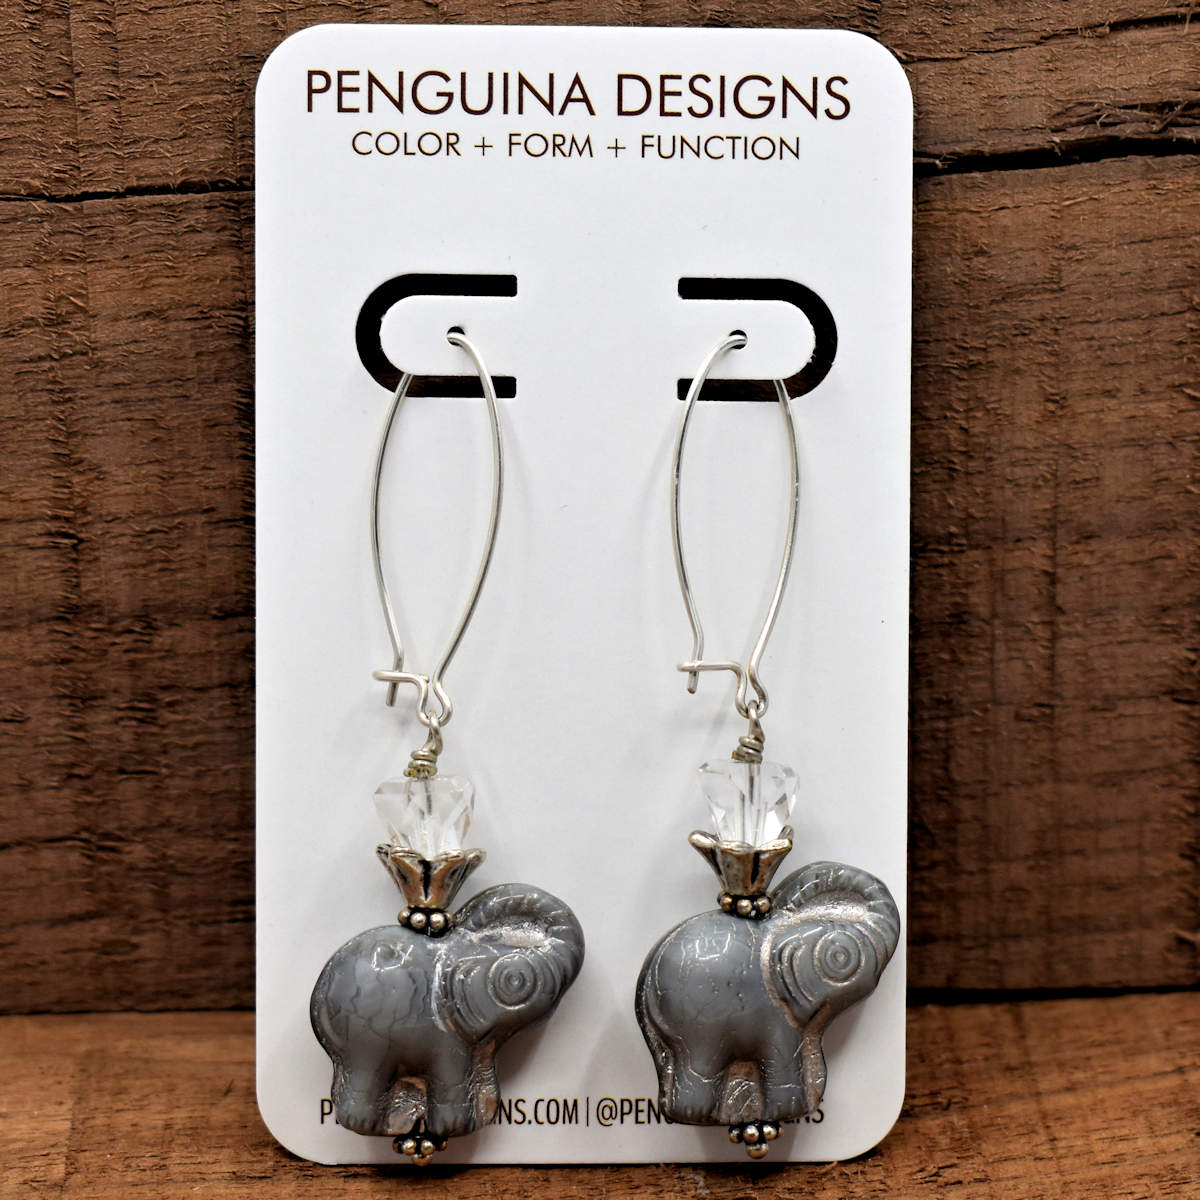 A pair of earrings on a white card rest against a wood background. The earrings have long silver oval wires that latch and drops made from chunky silvery gray elephants. Each elephant has an upturned silver cone holding a clear crystal bead on its back.